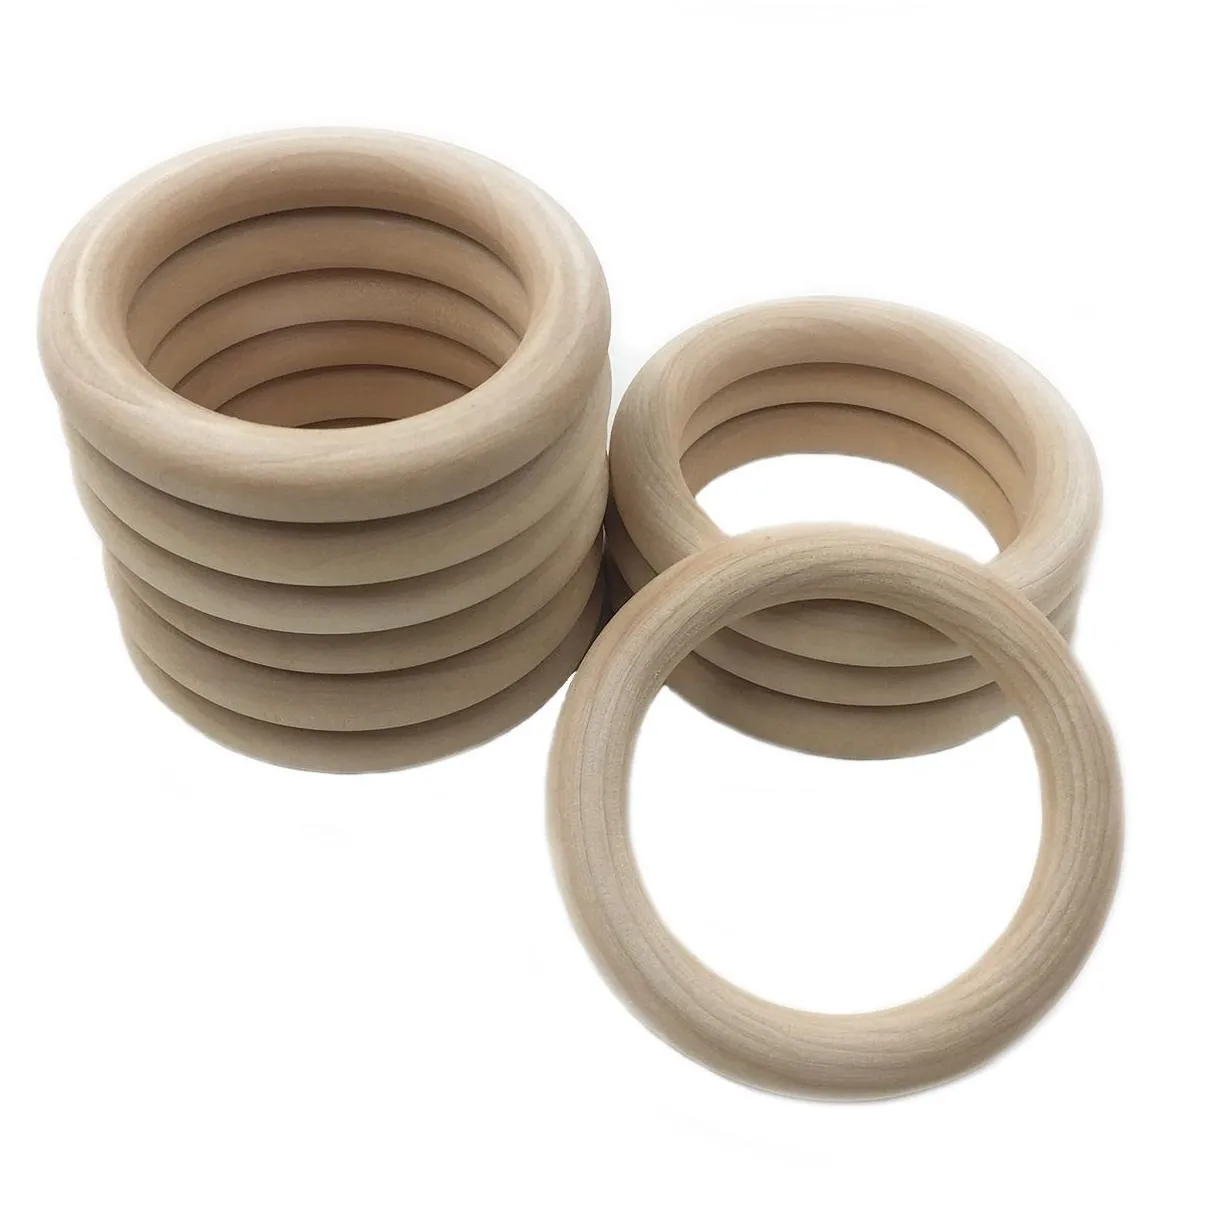 50mm Baby Wooden Teethers Ring Kids Wood Soothers Children DIY Jewelry Making Craft Bracelet Soother M1714